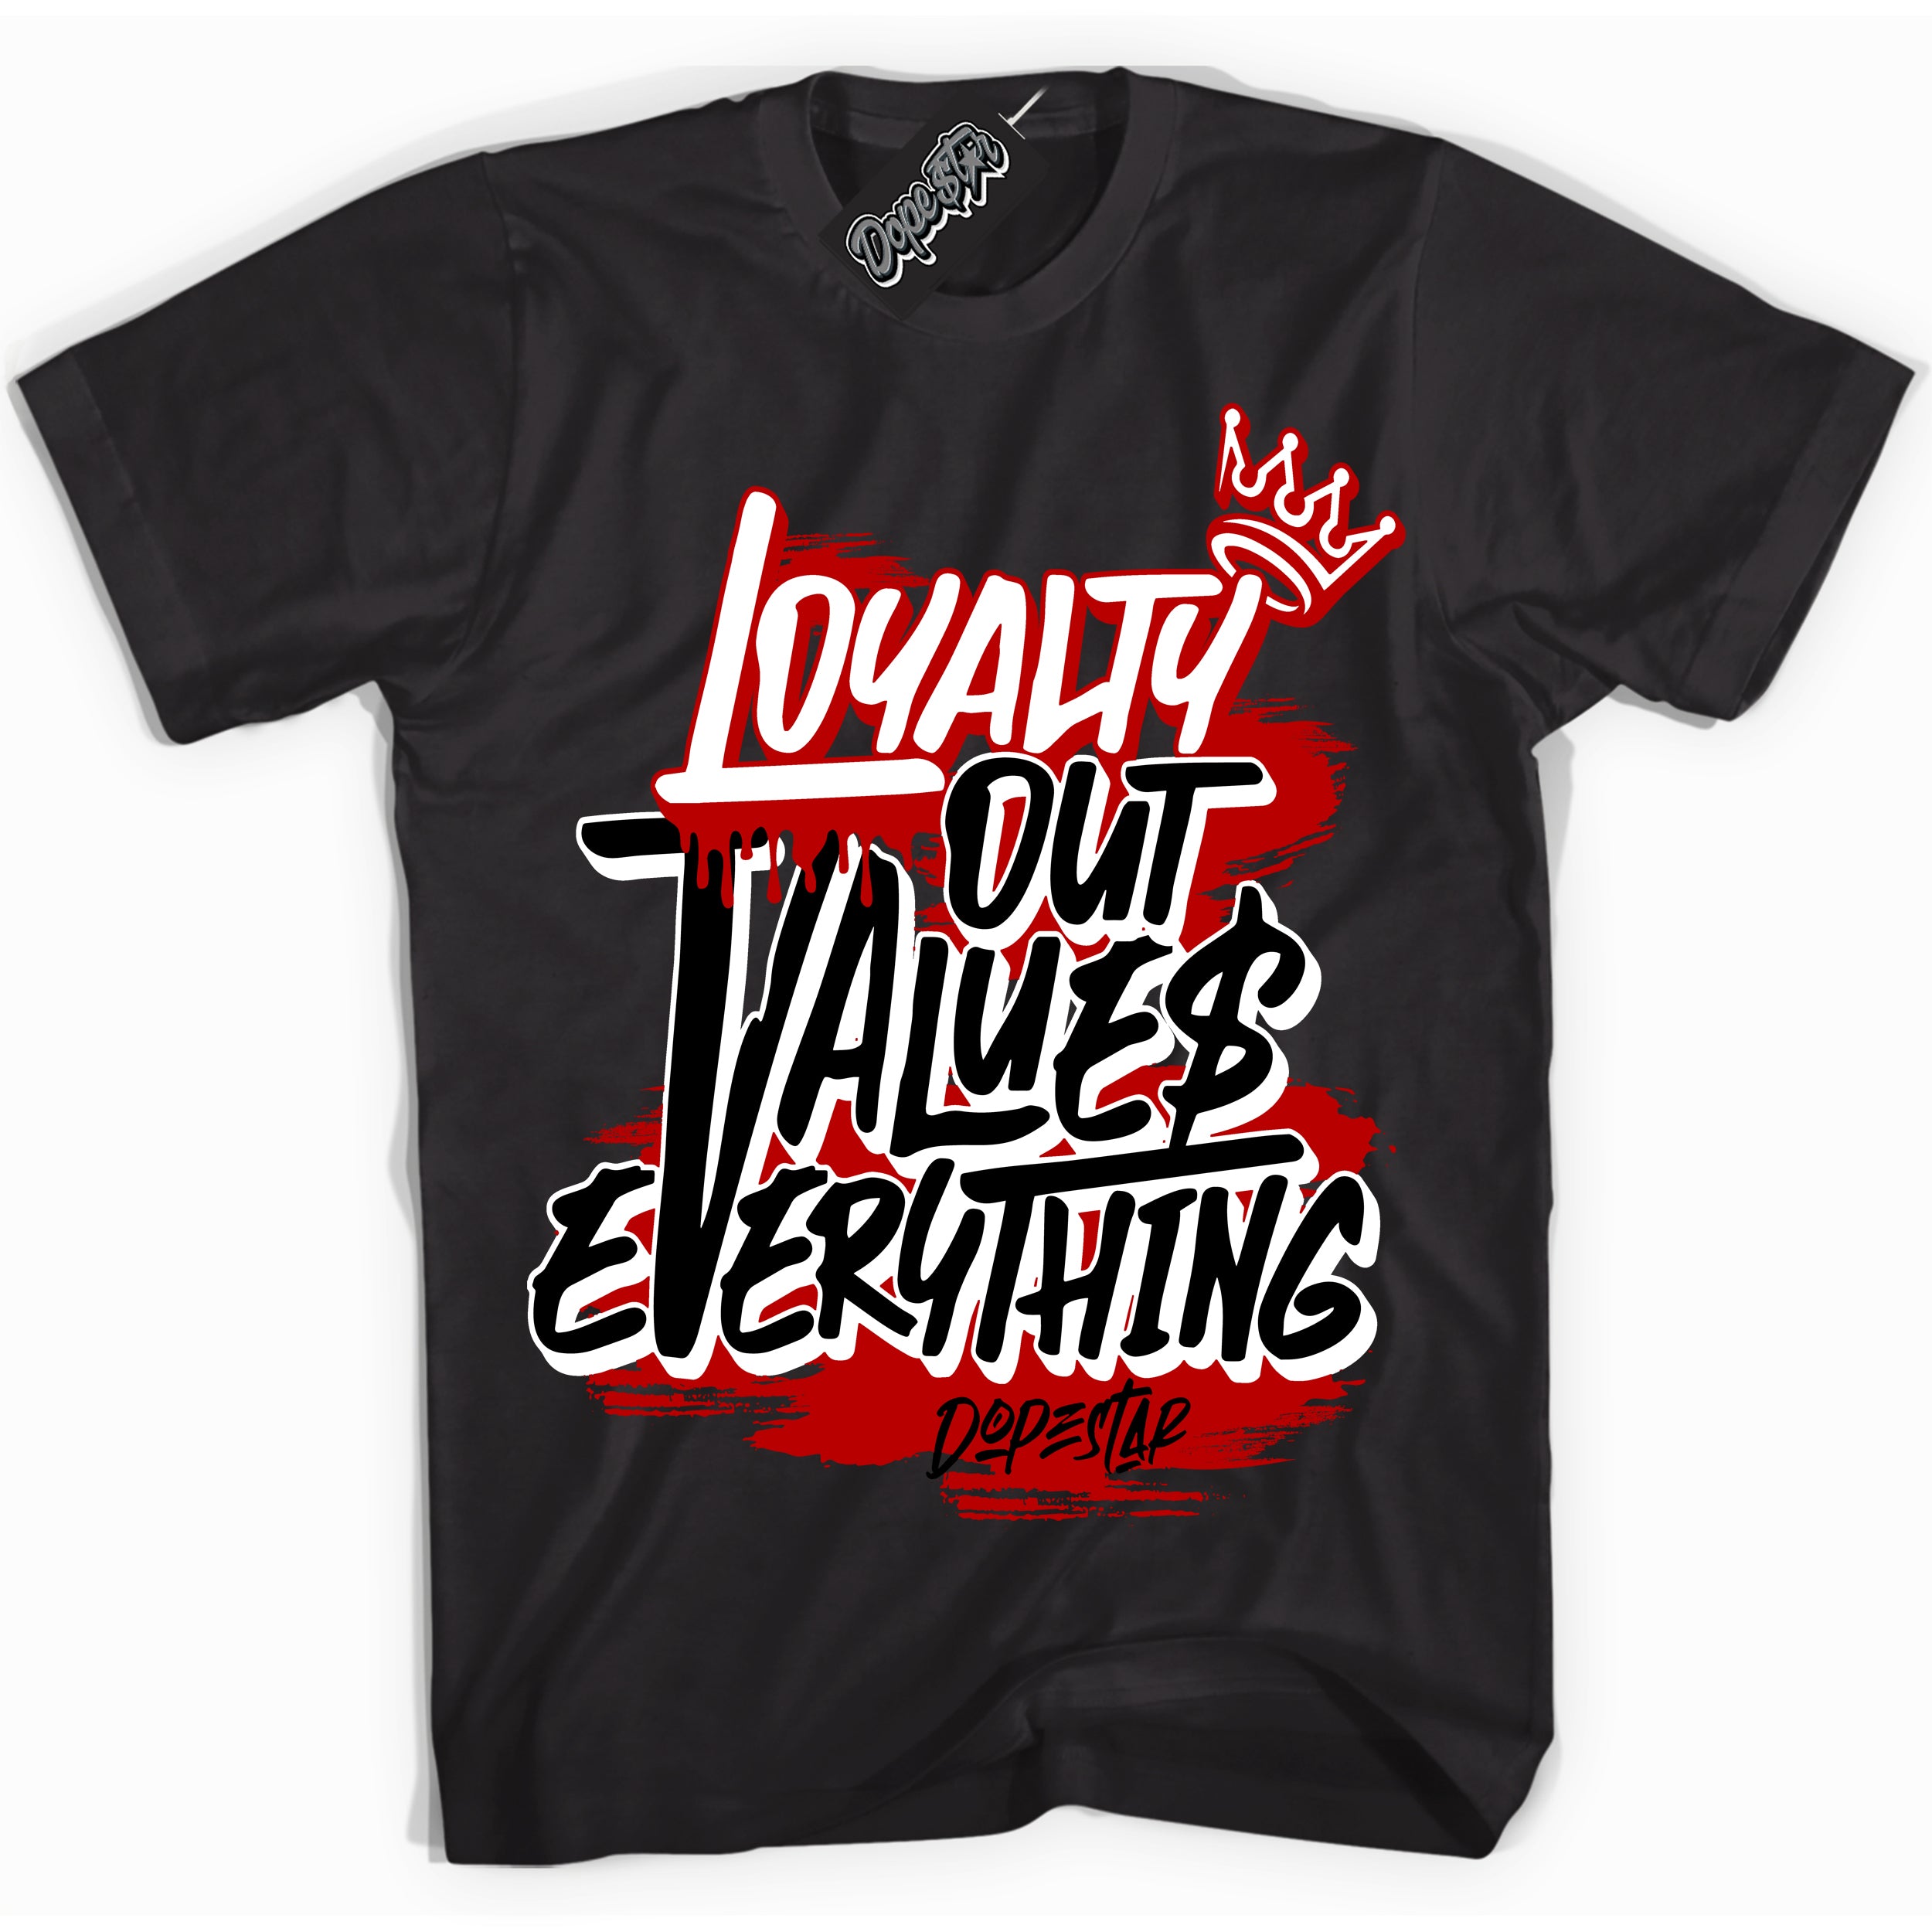 Cool Black Shirt with “ Loyalty Out Values Everything” design that perfectly matches Gym Red Panda 1s Sneakers.